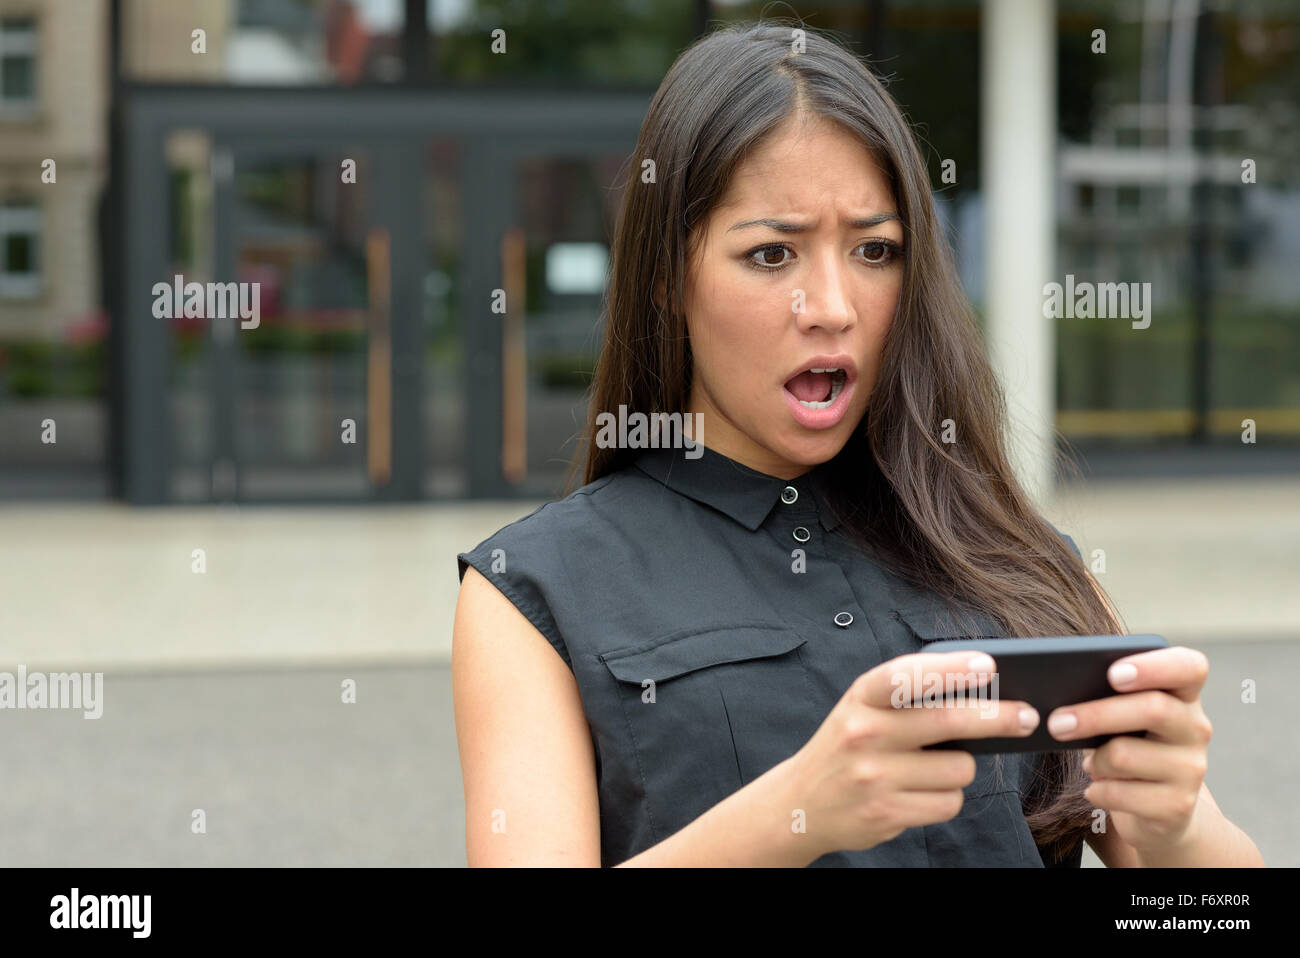 Young woman reacting in horror to an sms, text message or email on her mobile phone as she stands outdoors in a quiet urban stre Stock Photo